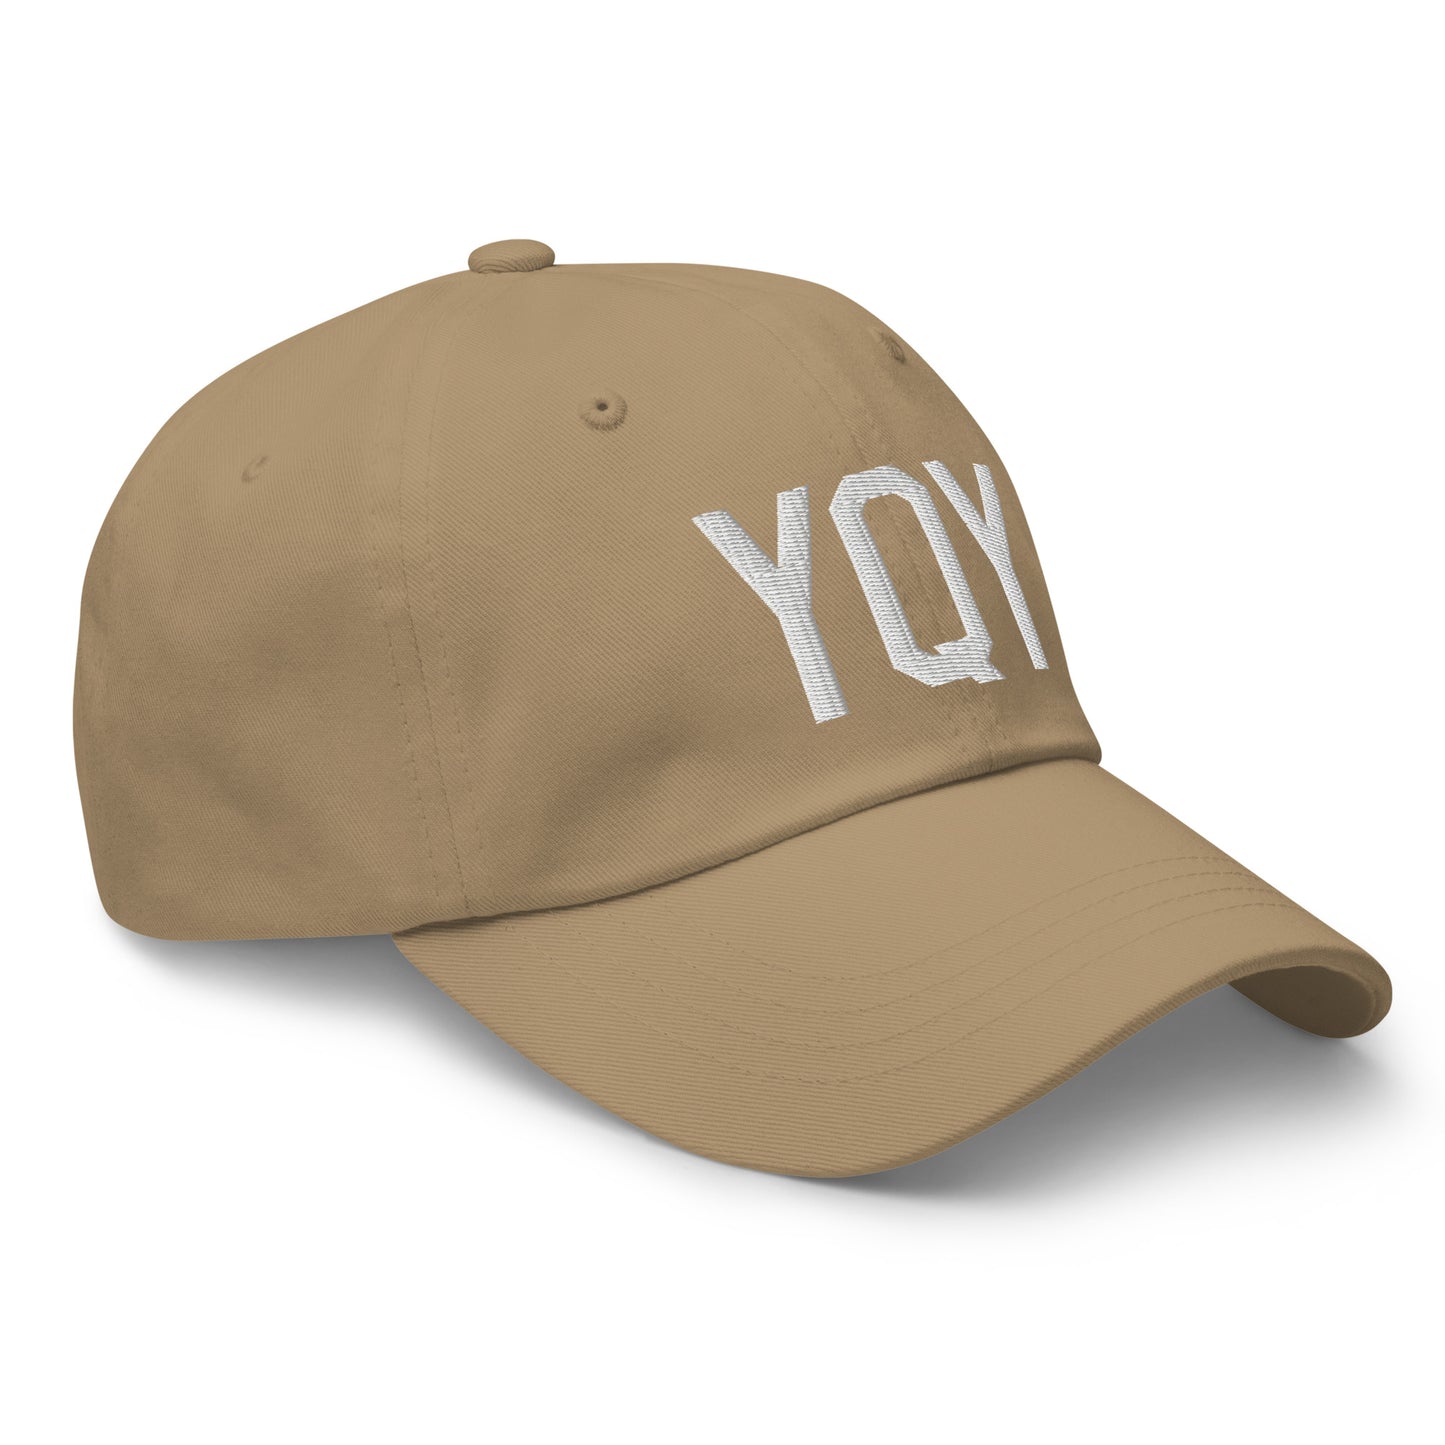 Airport Code Baseball Cap - White • YQY Sydney • YHM Designs - Image 23